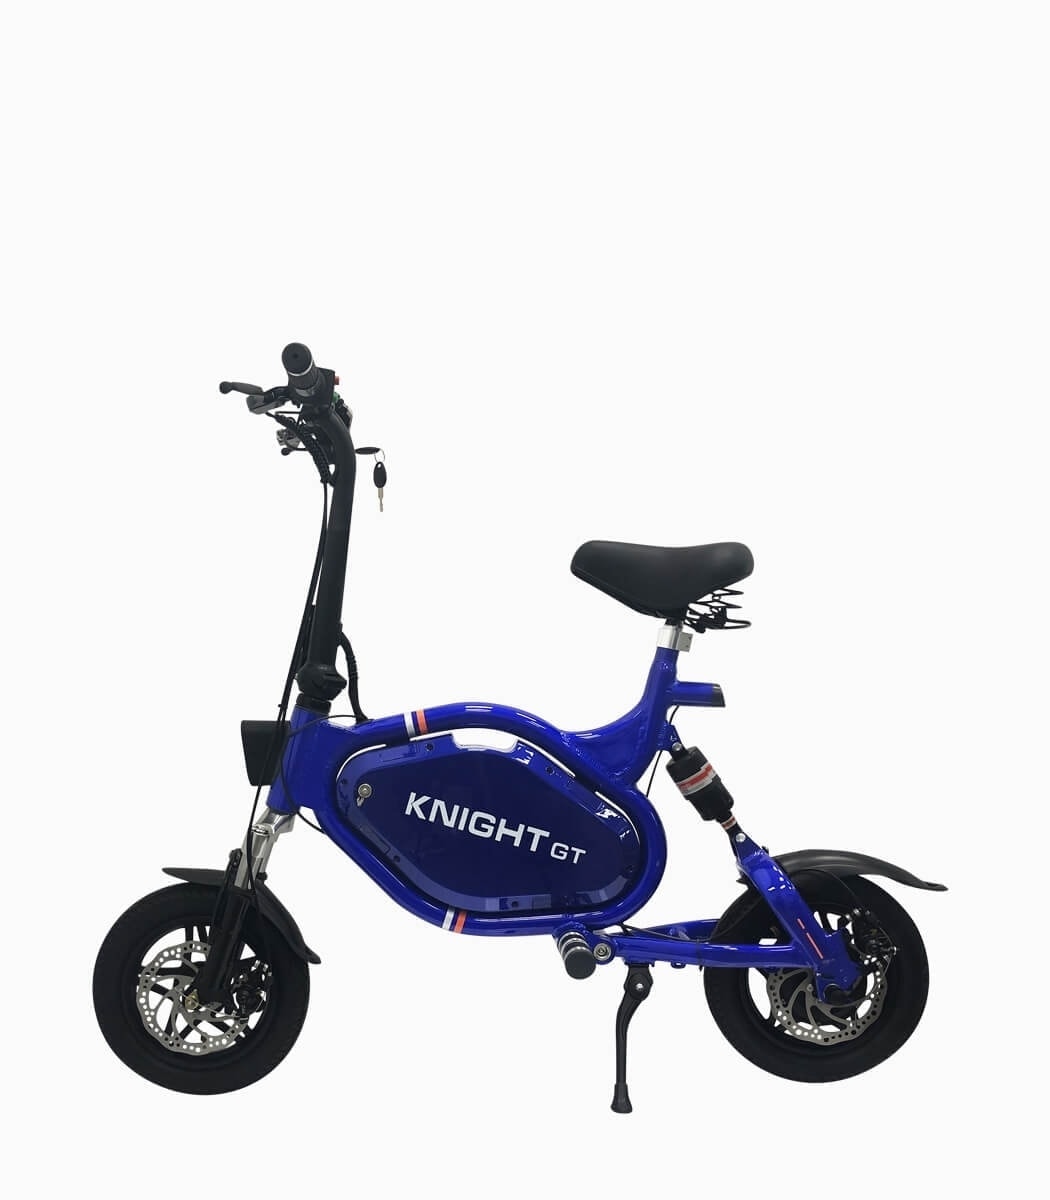 MOBOT KNIGHT GT (BLUE10AH) UL2272 certified e-scooter left